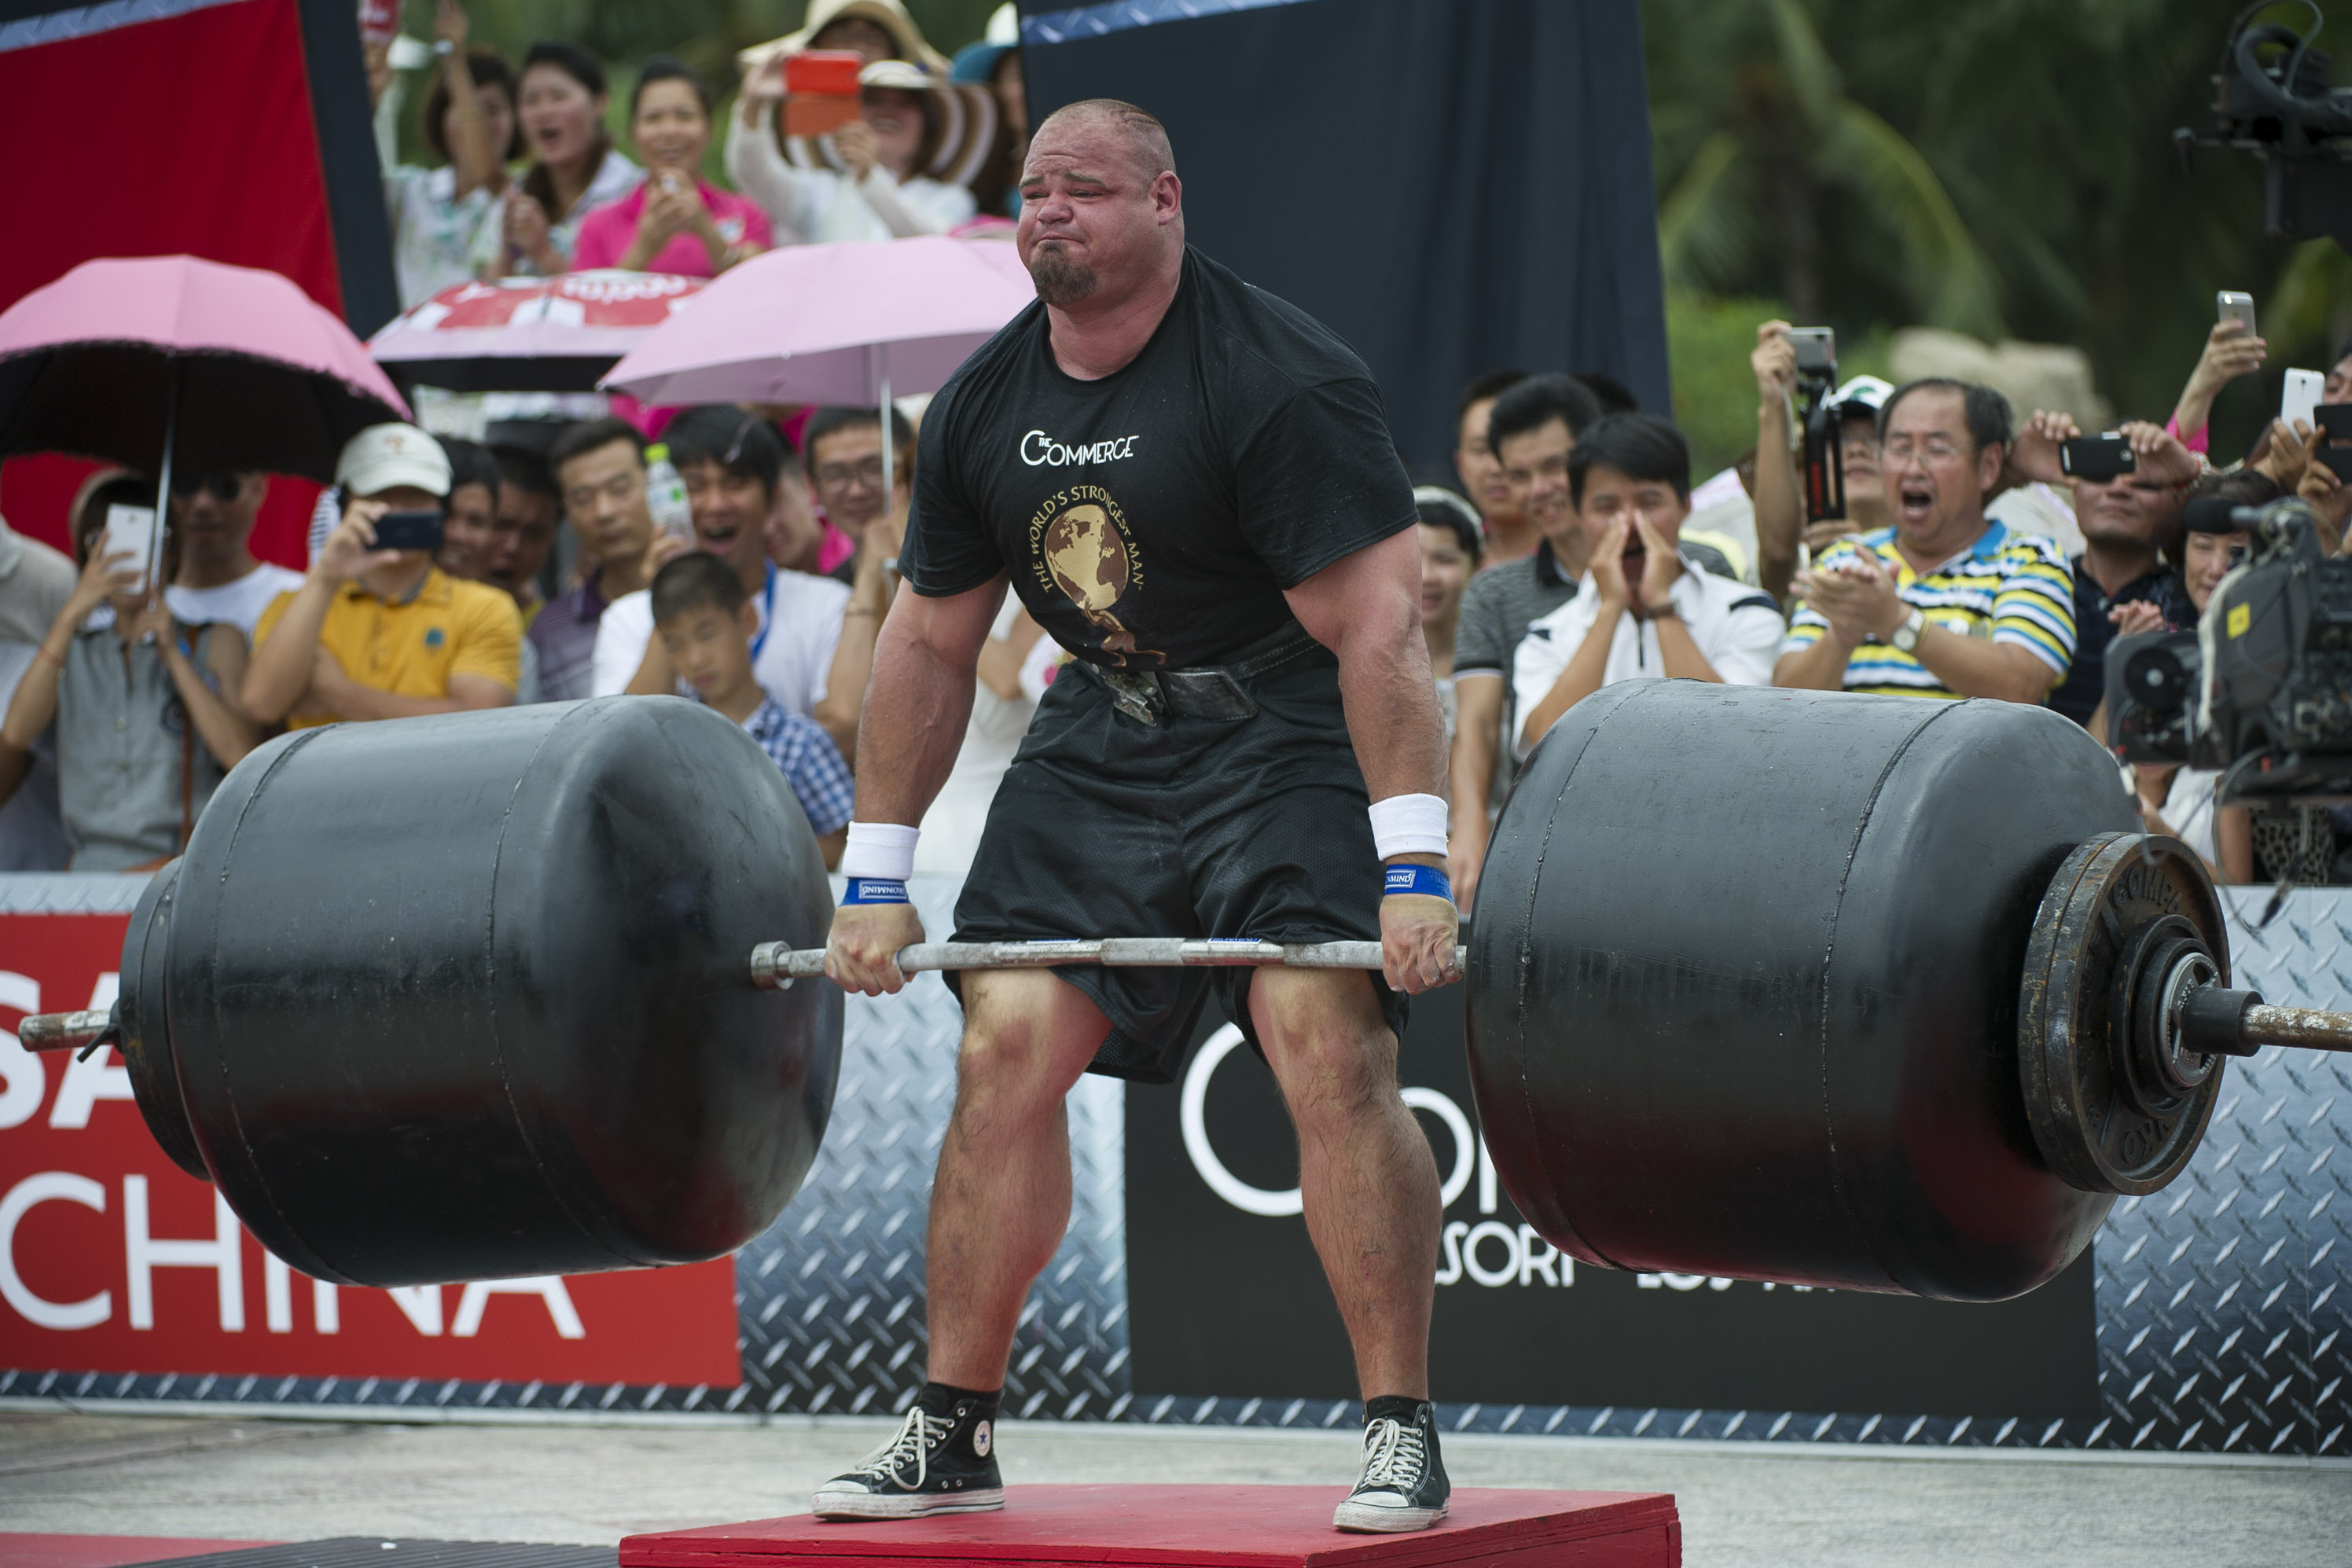 How many reps can Brian Shaw get in the squat?